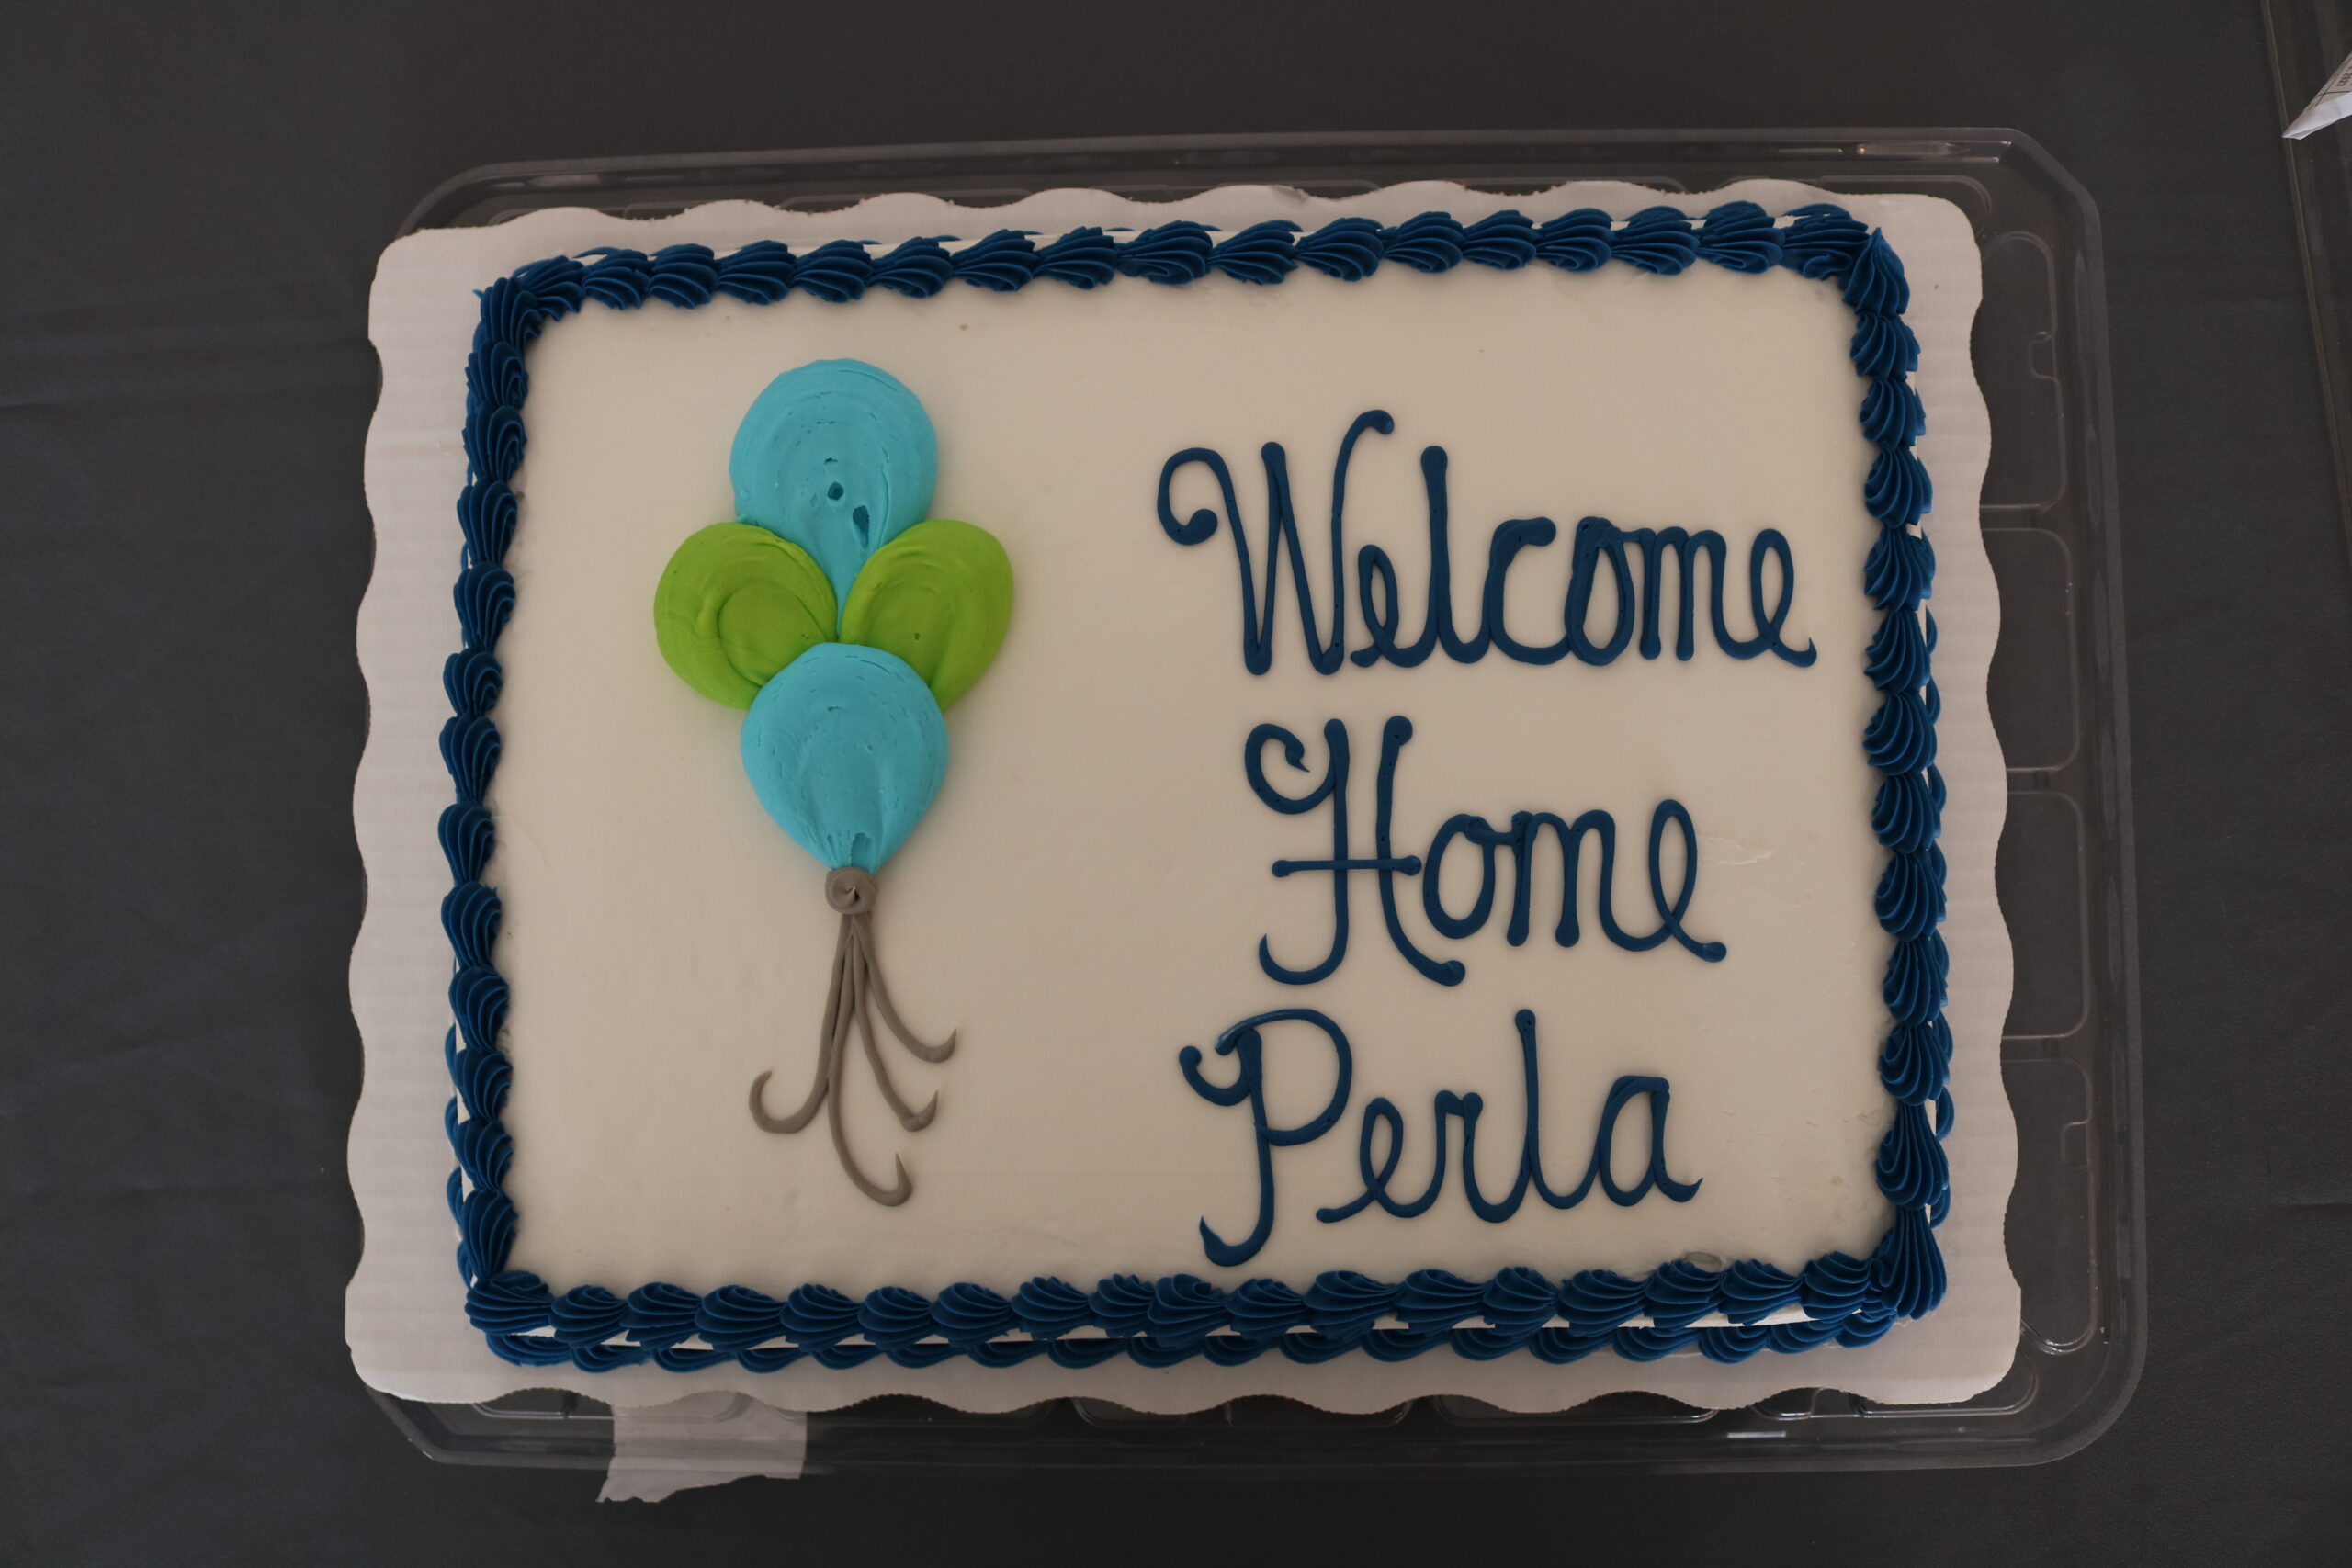 Cake that says "Welcome Home, Perla"